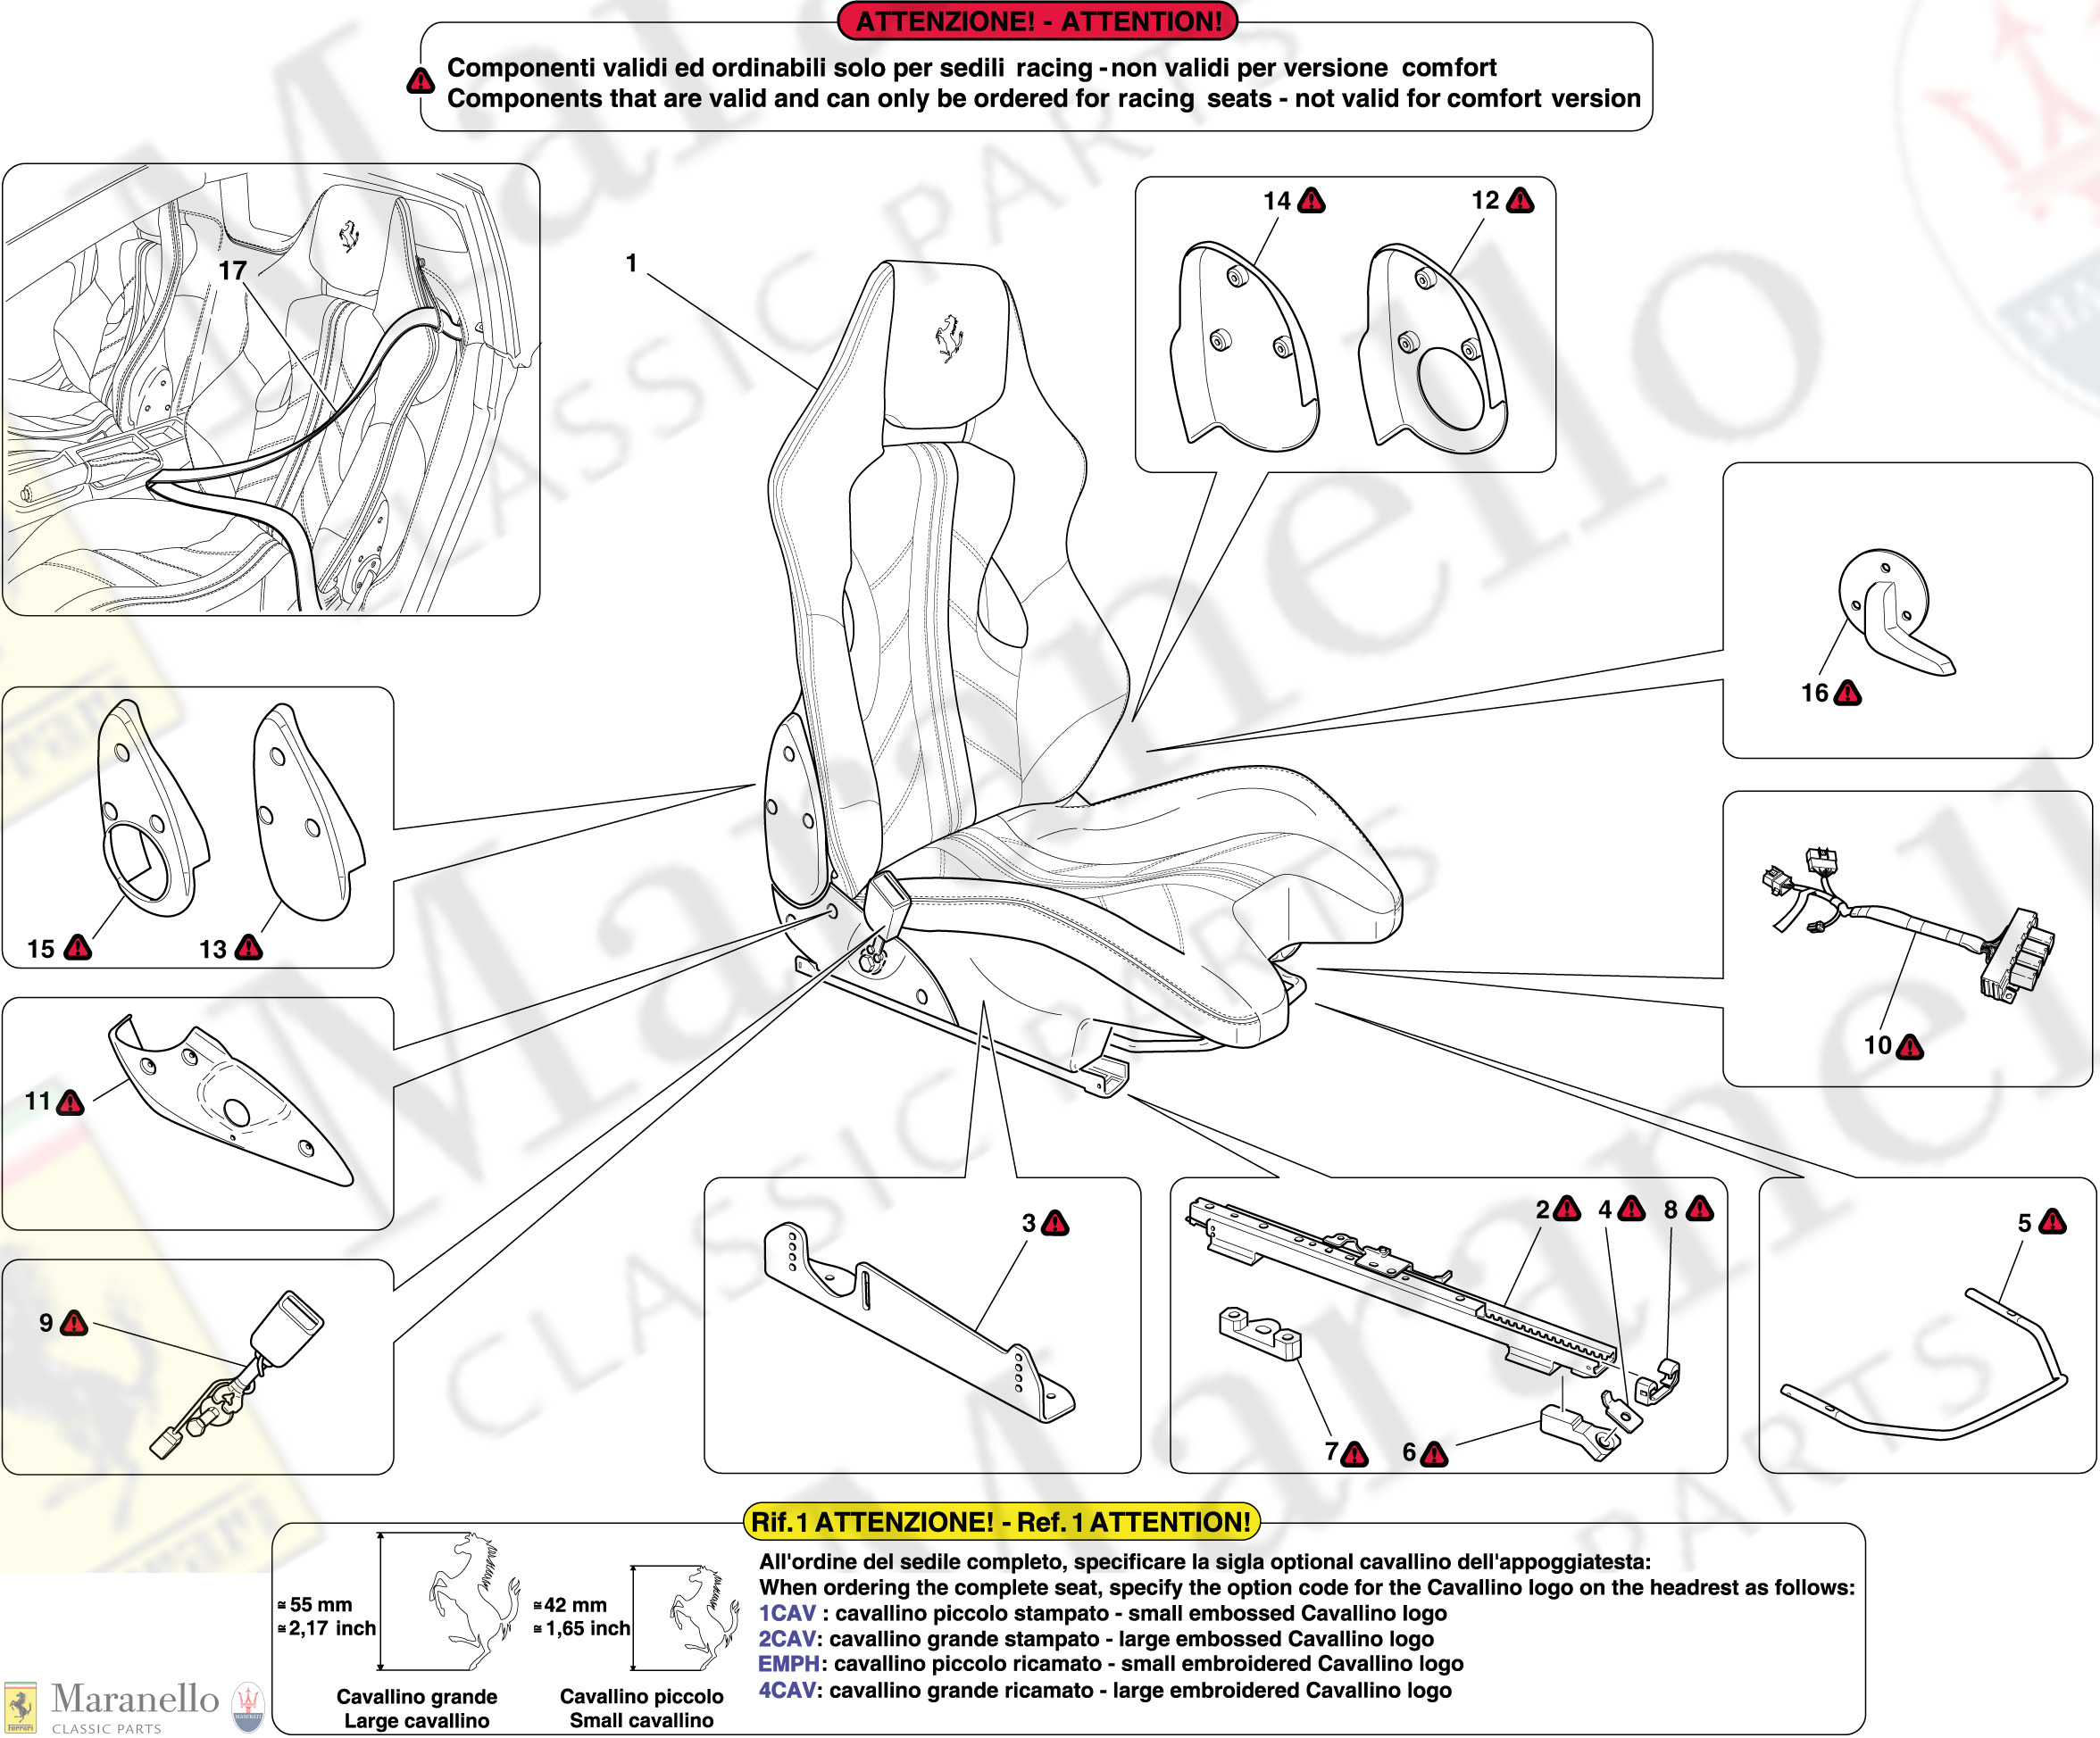 125 - Front Racing Seat - Guides And Adjustment Mechanisms